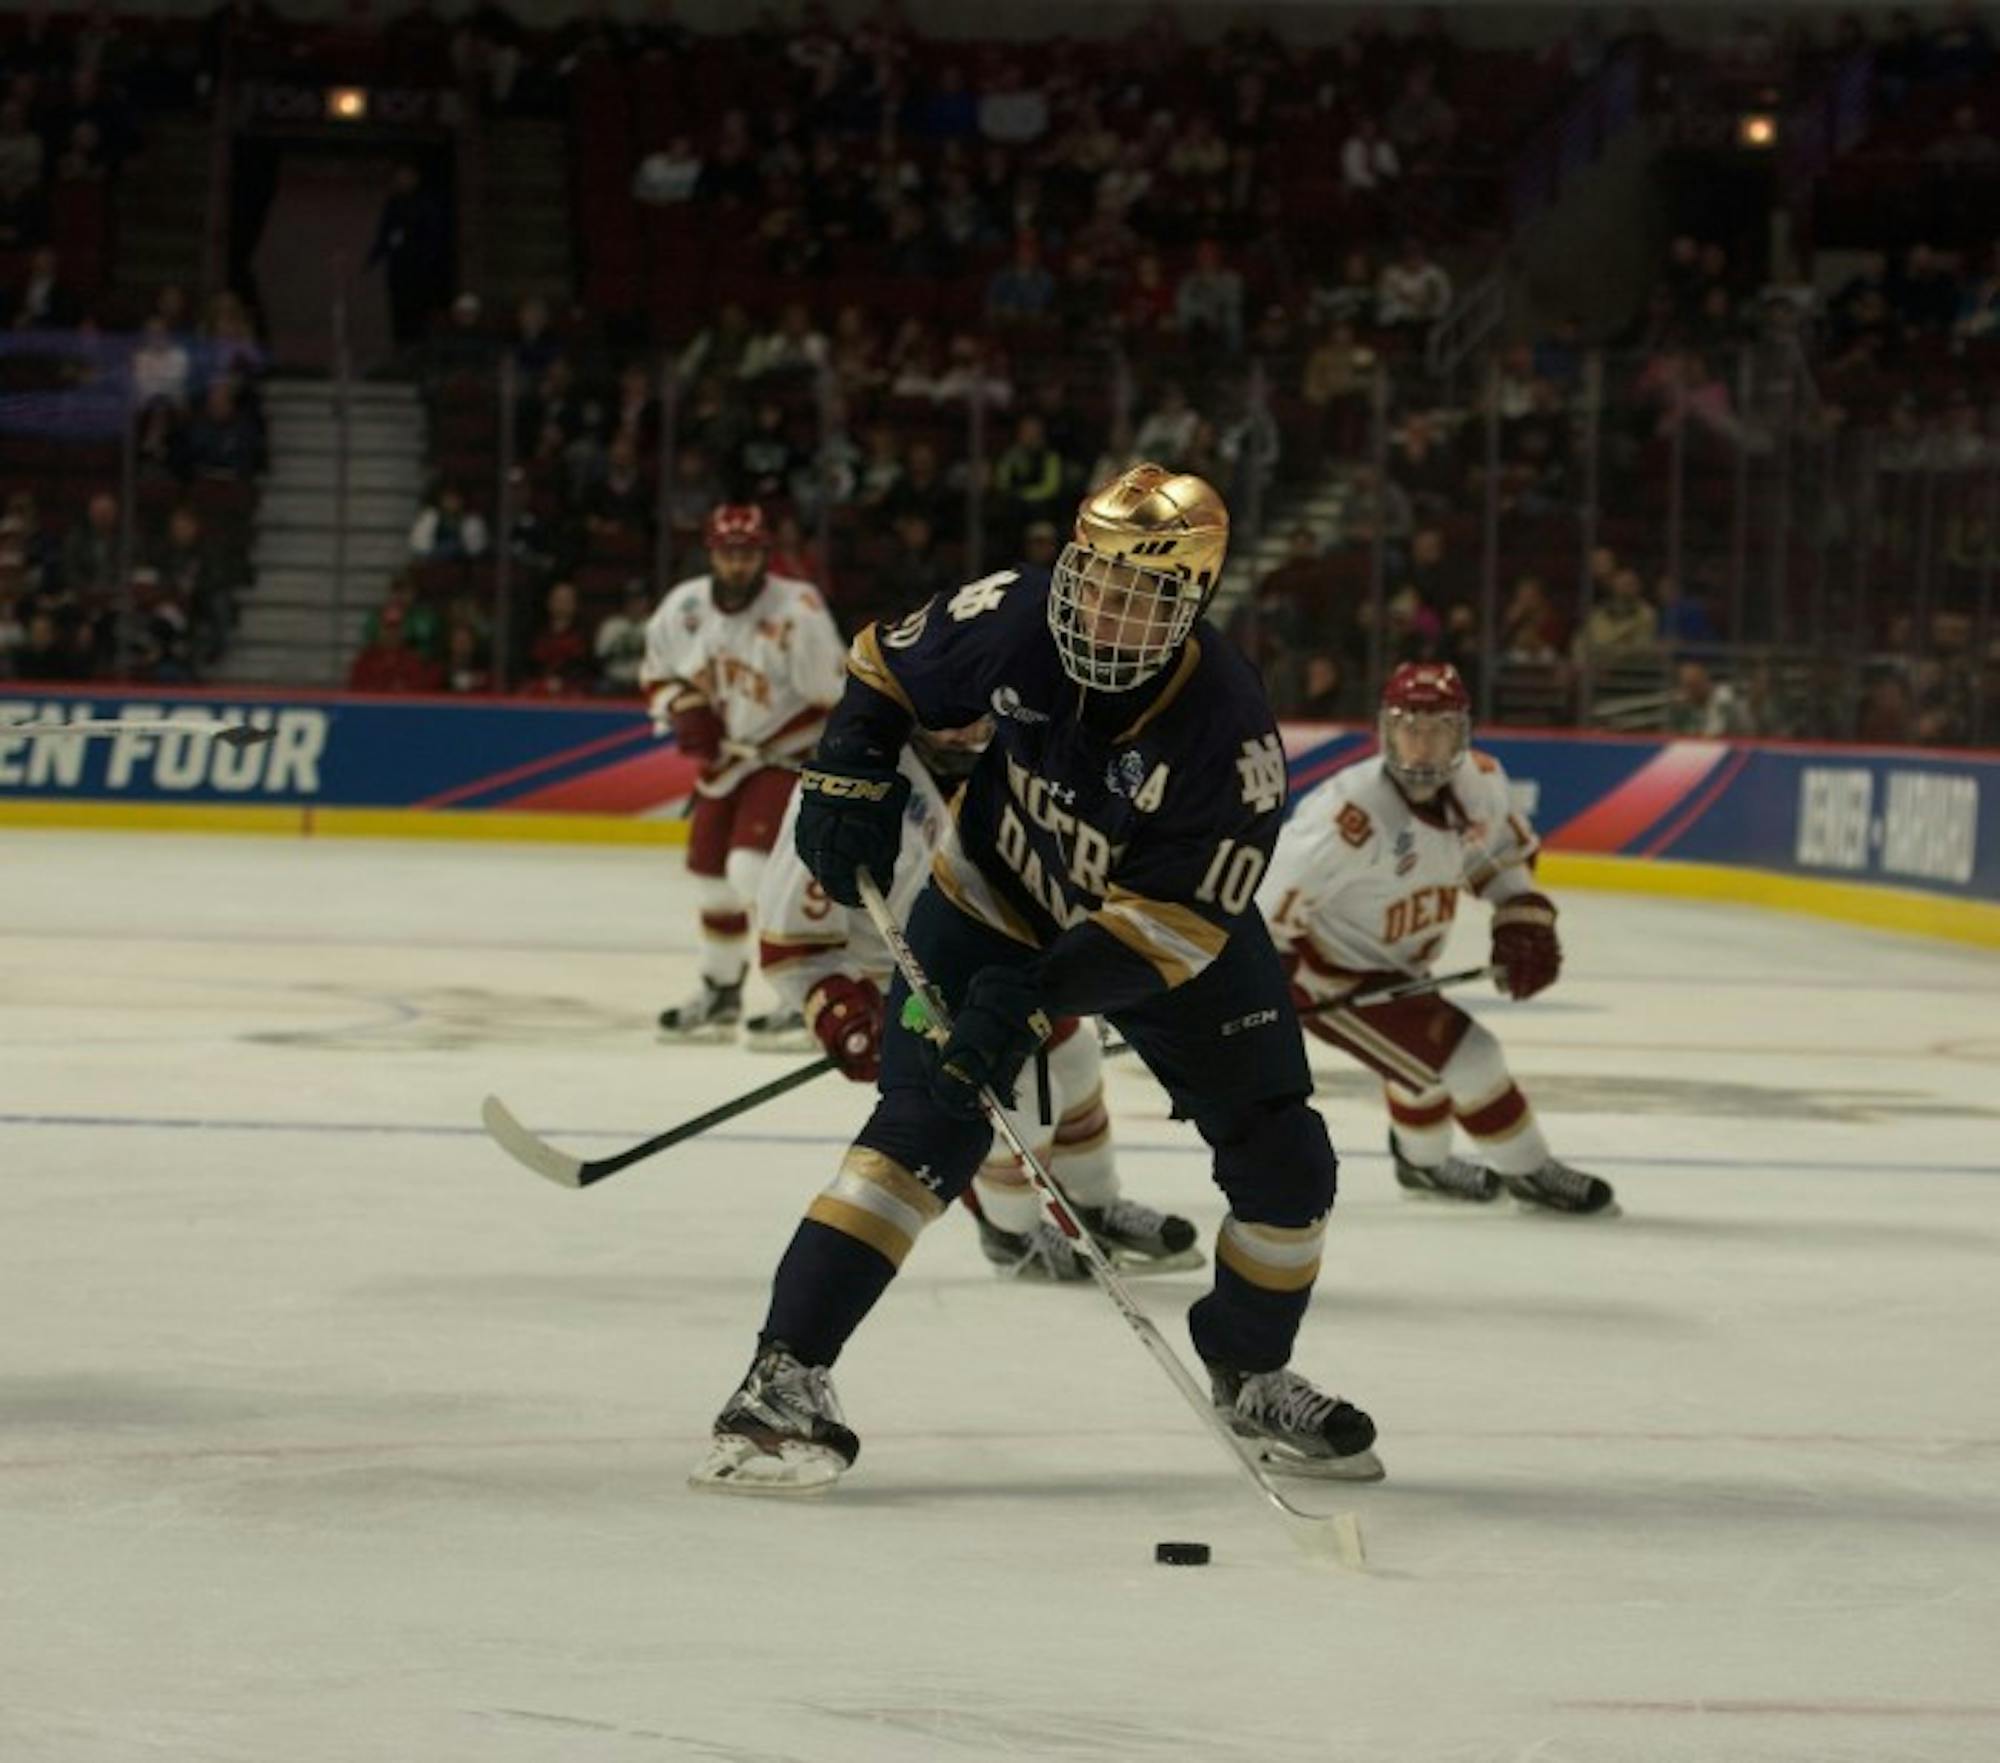 Irish junior forward Anders Bjork looks to move the puck during Notre Dame’s 6-1 loss to Denver in the Frozen Four on April 6 at United Center. Bjork scored 109 points for the Irish during his career.